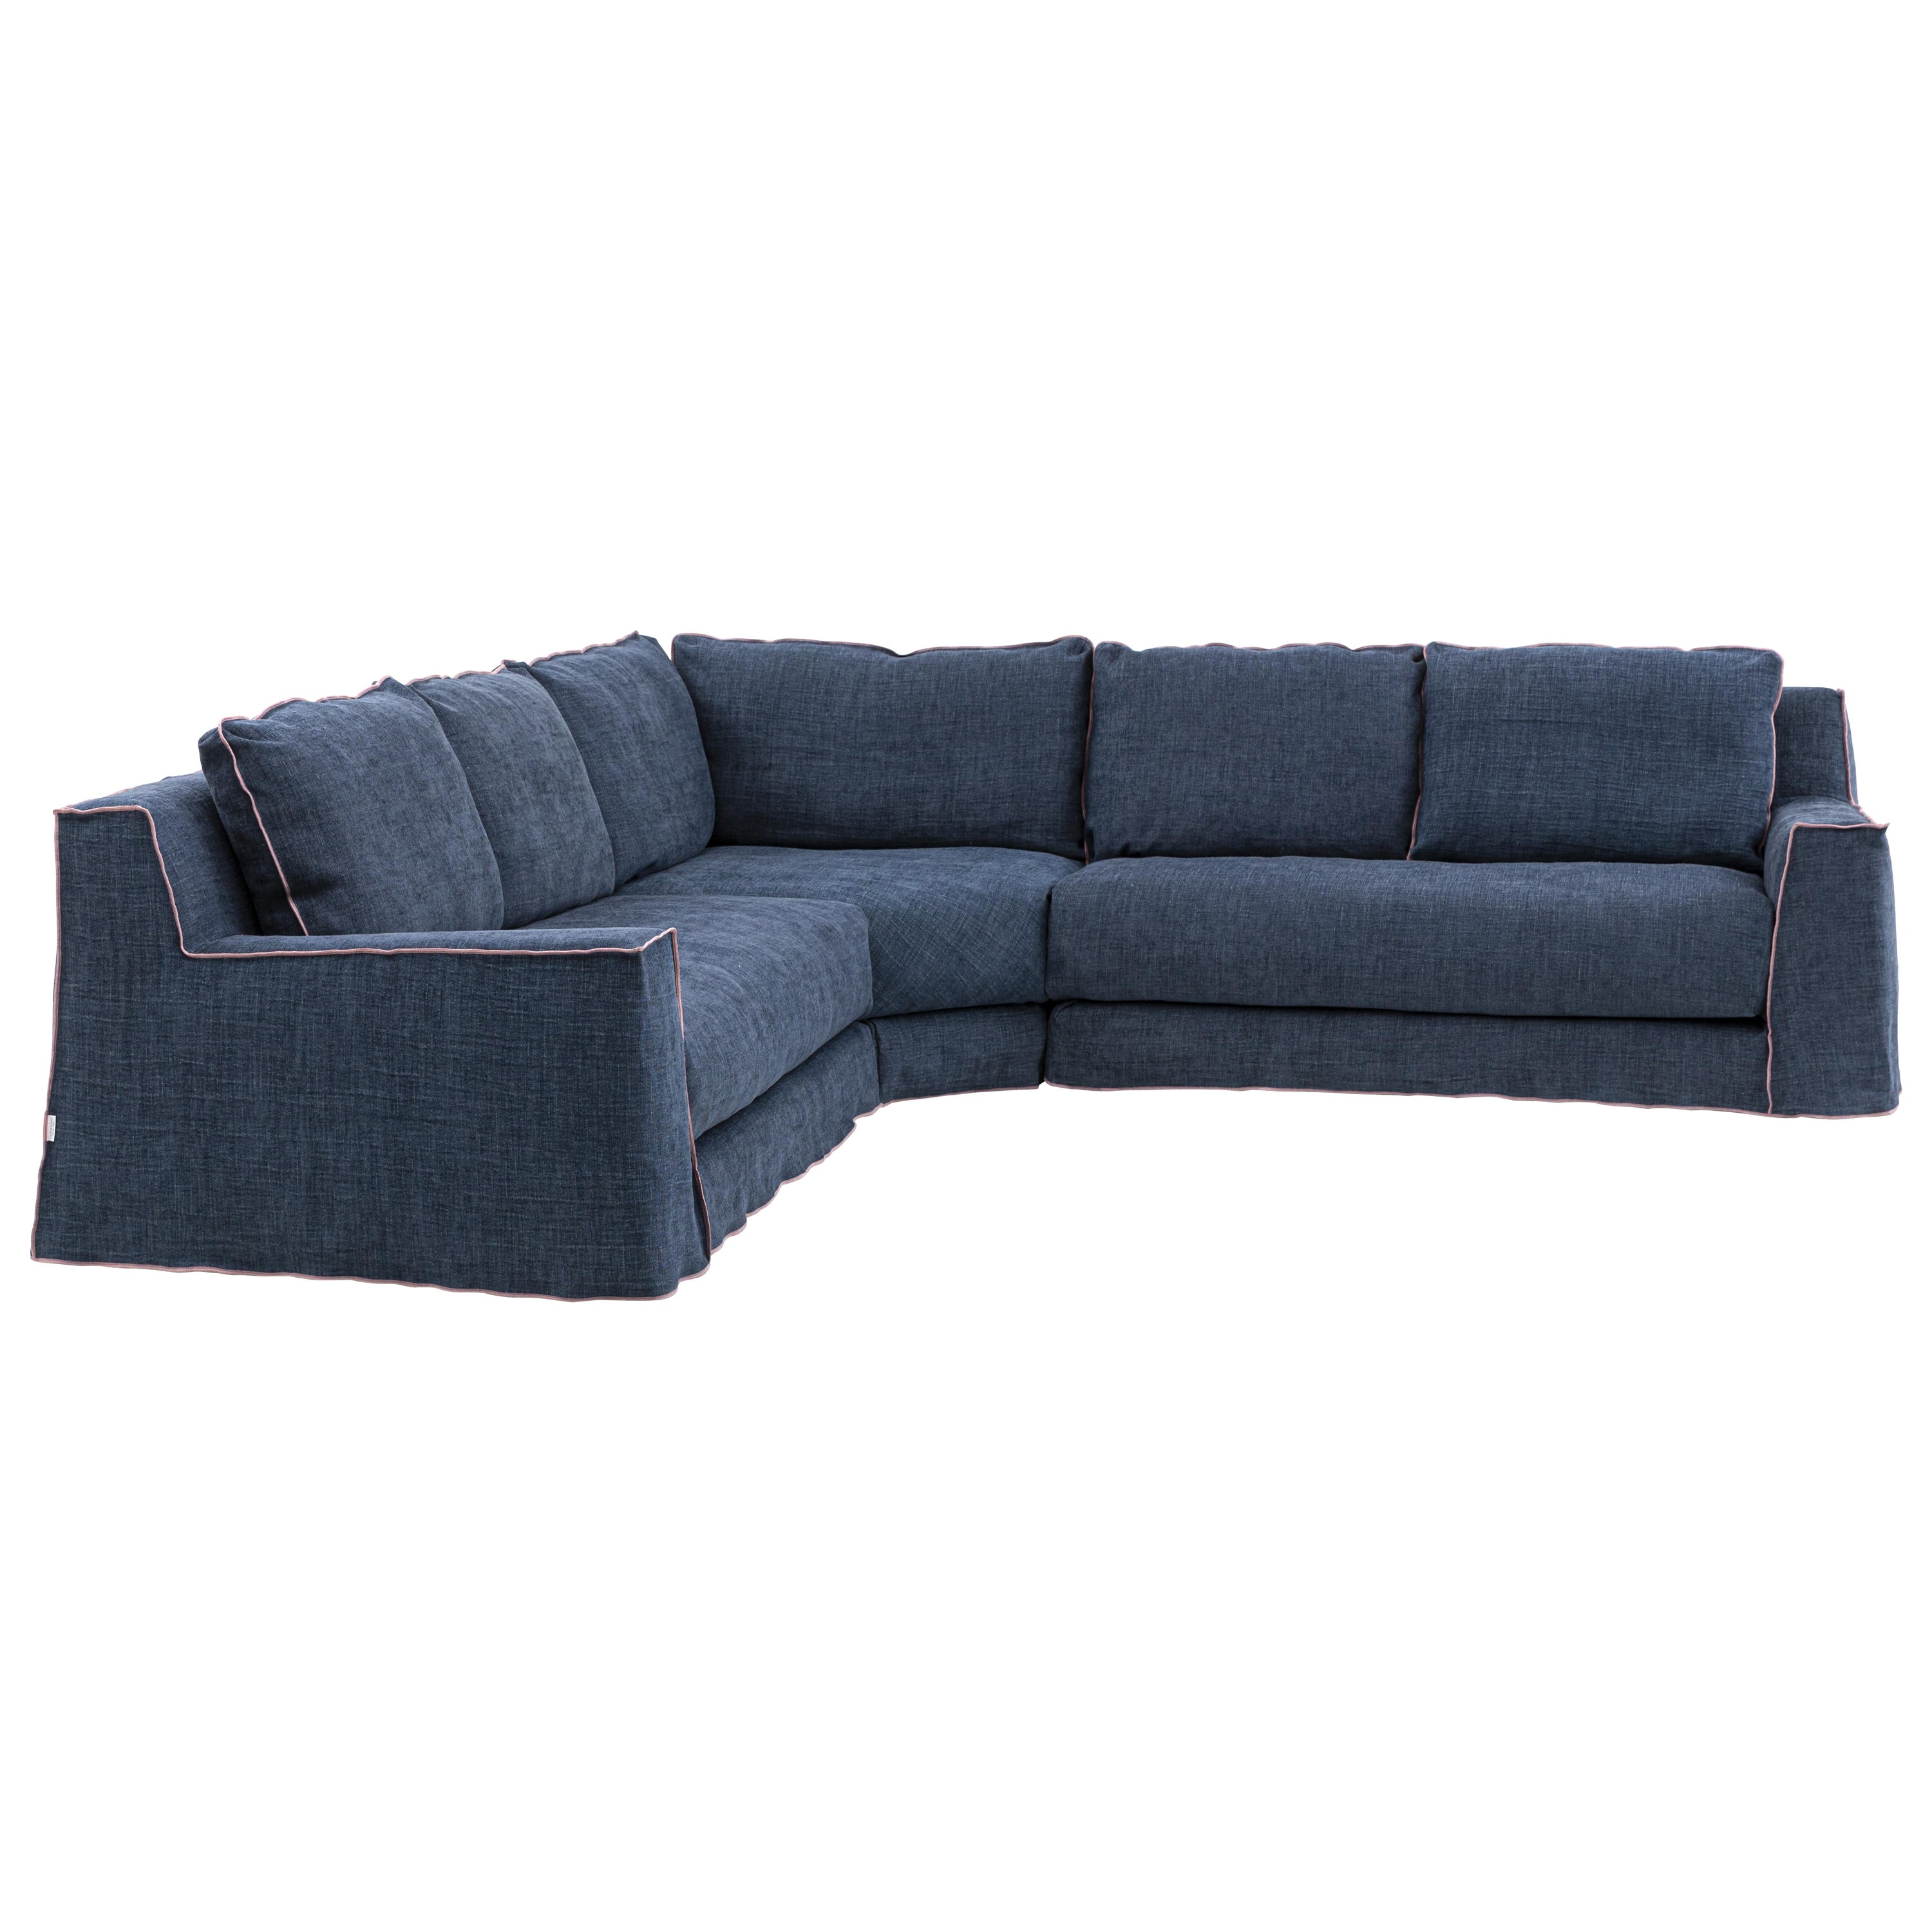 Gervasoni Loll 7 Modular Sofa in Munch Upholstery by Paola Navone